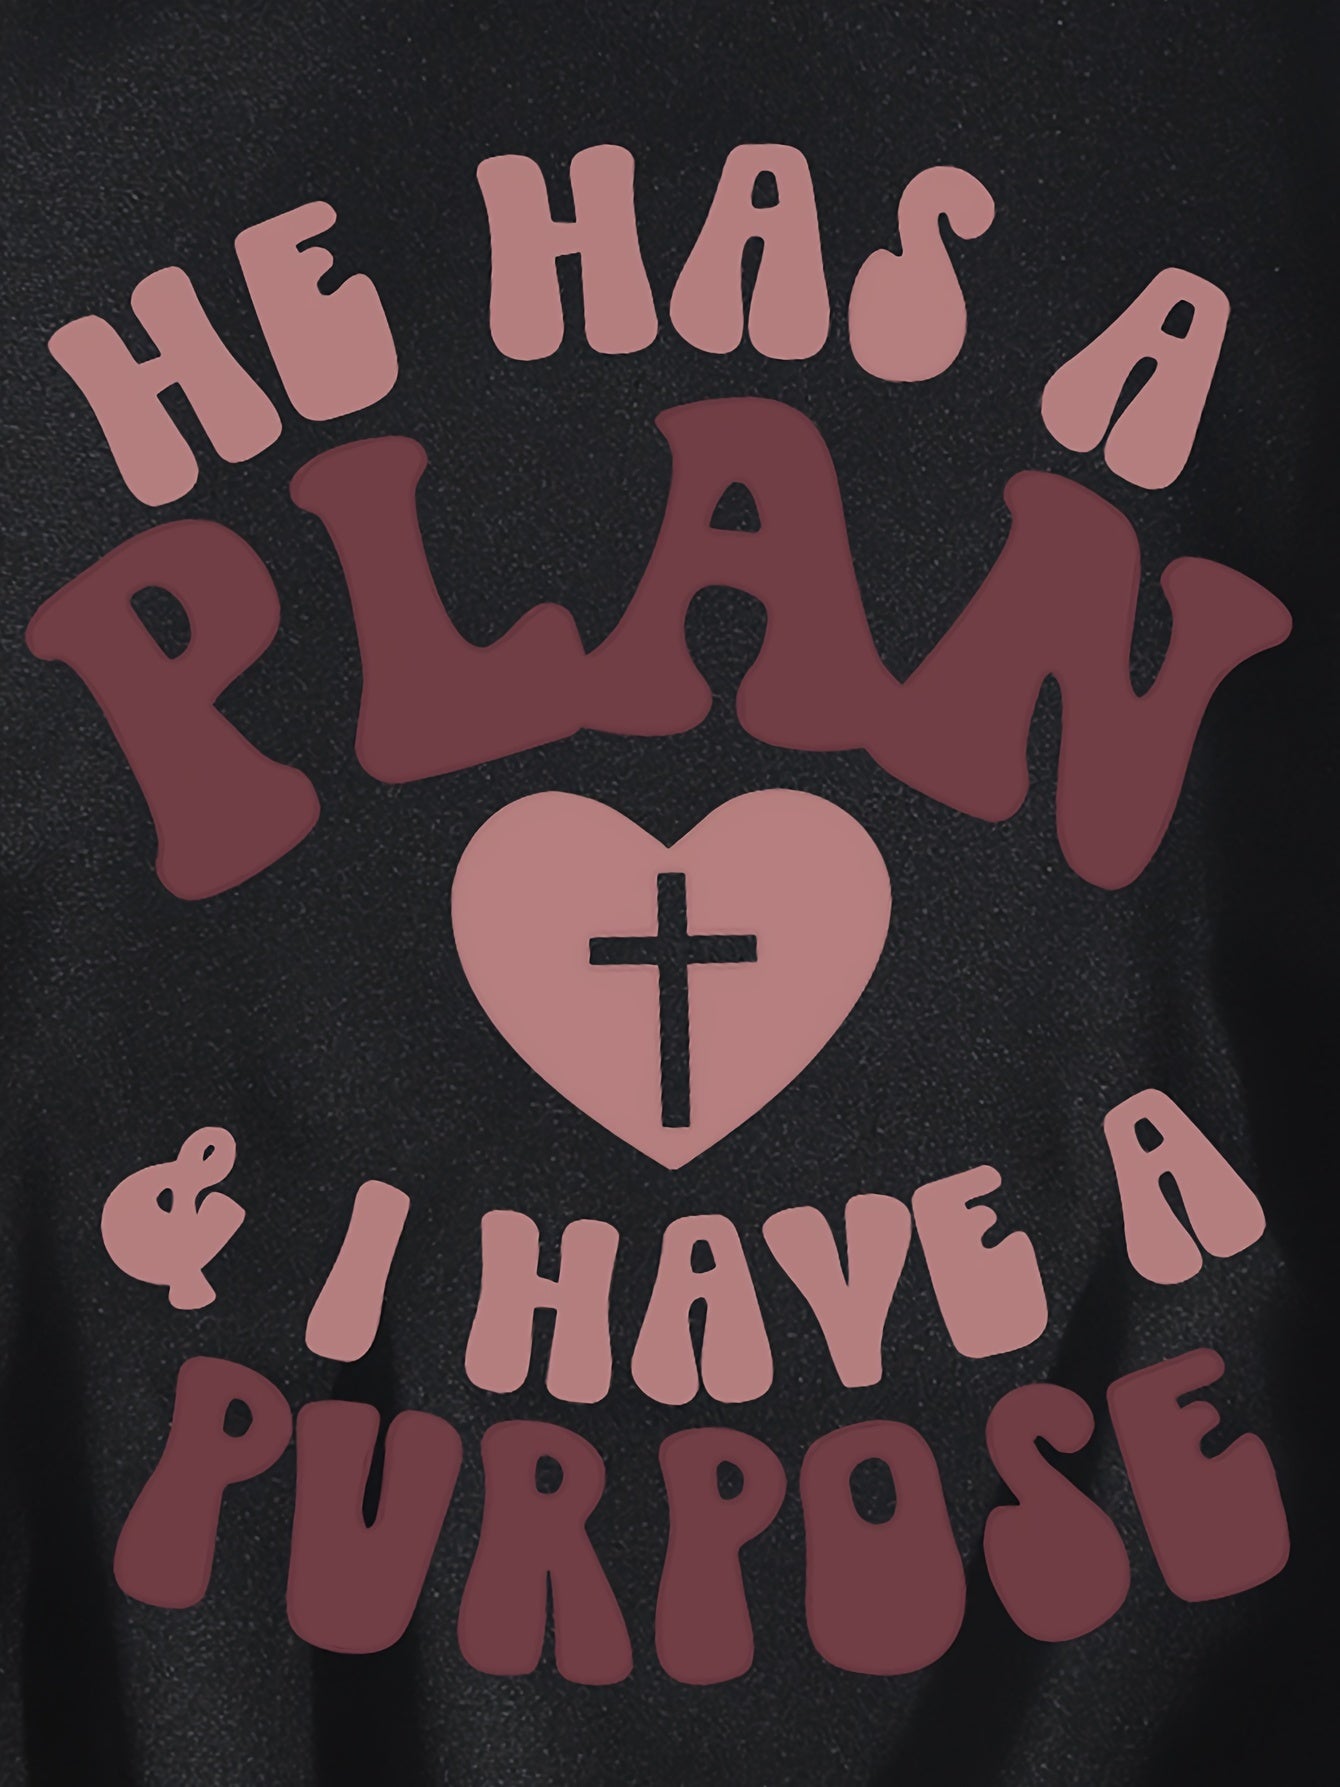 God Has A Plan & I Have A Purpose Plus Size Women's Christian Pullover Hooded Sweatshirt claimedbygoddesigns